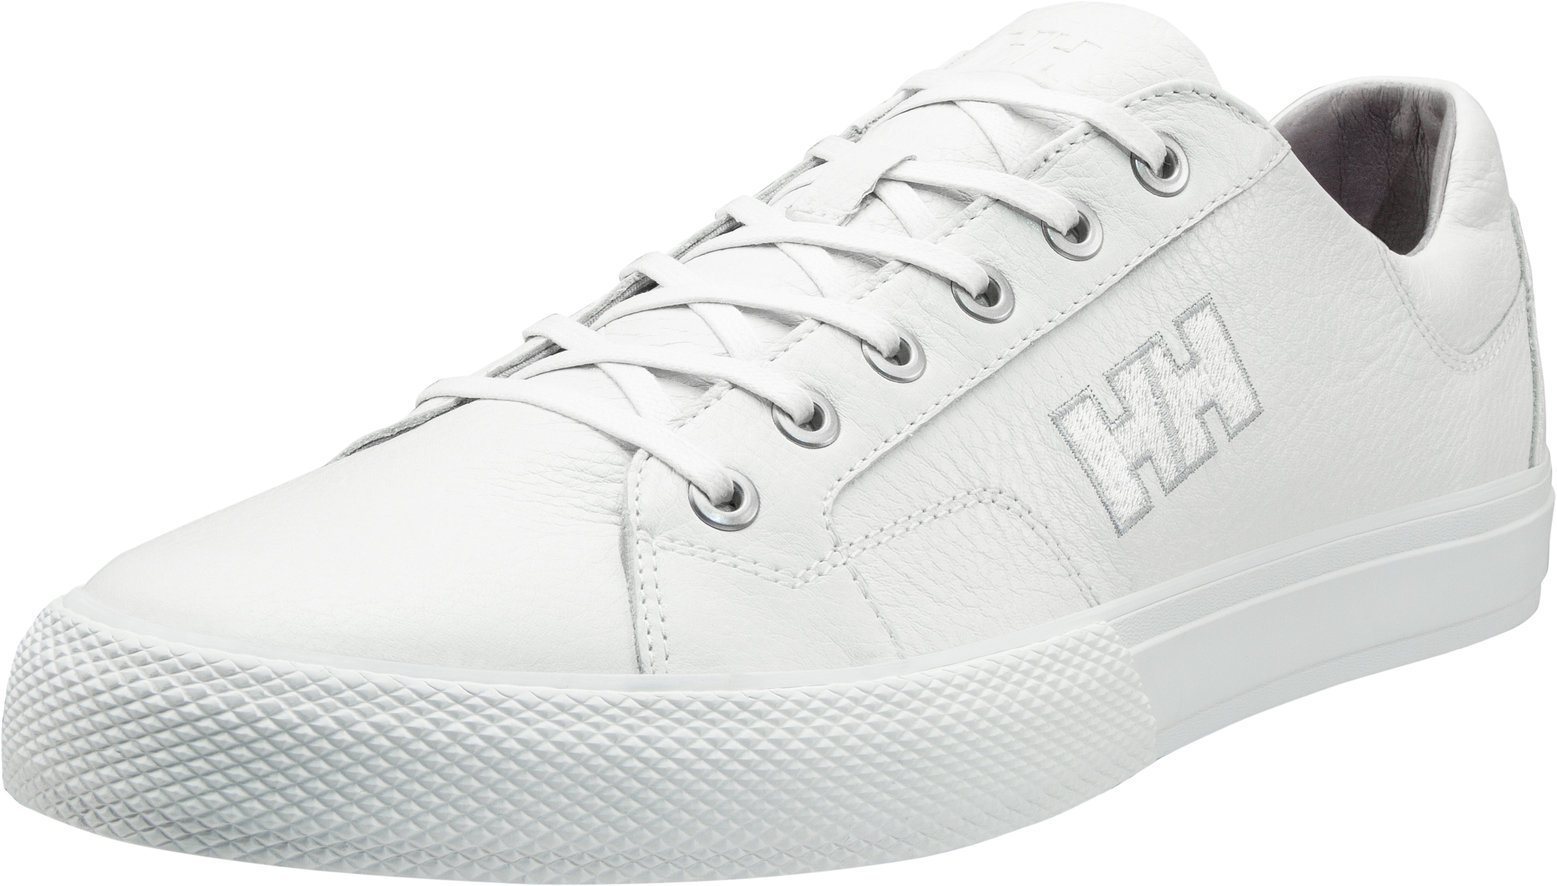 Mens Sailing Shoes Helly Hansen Fjord LV-2 Off White - 42